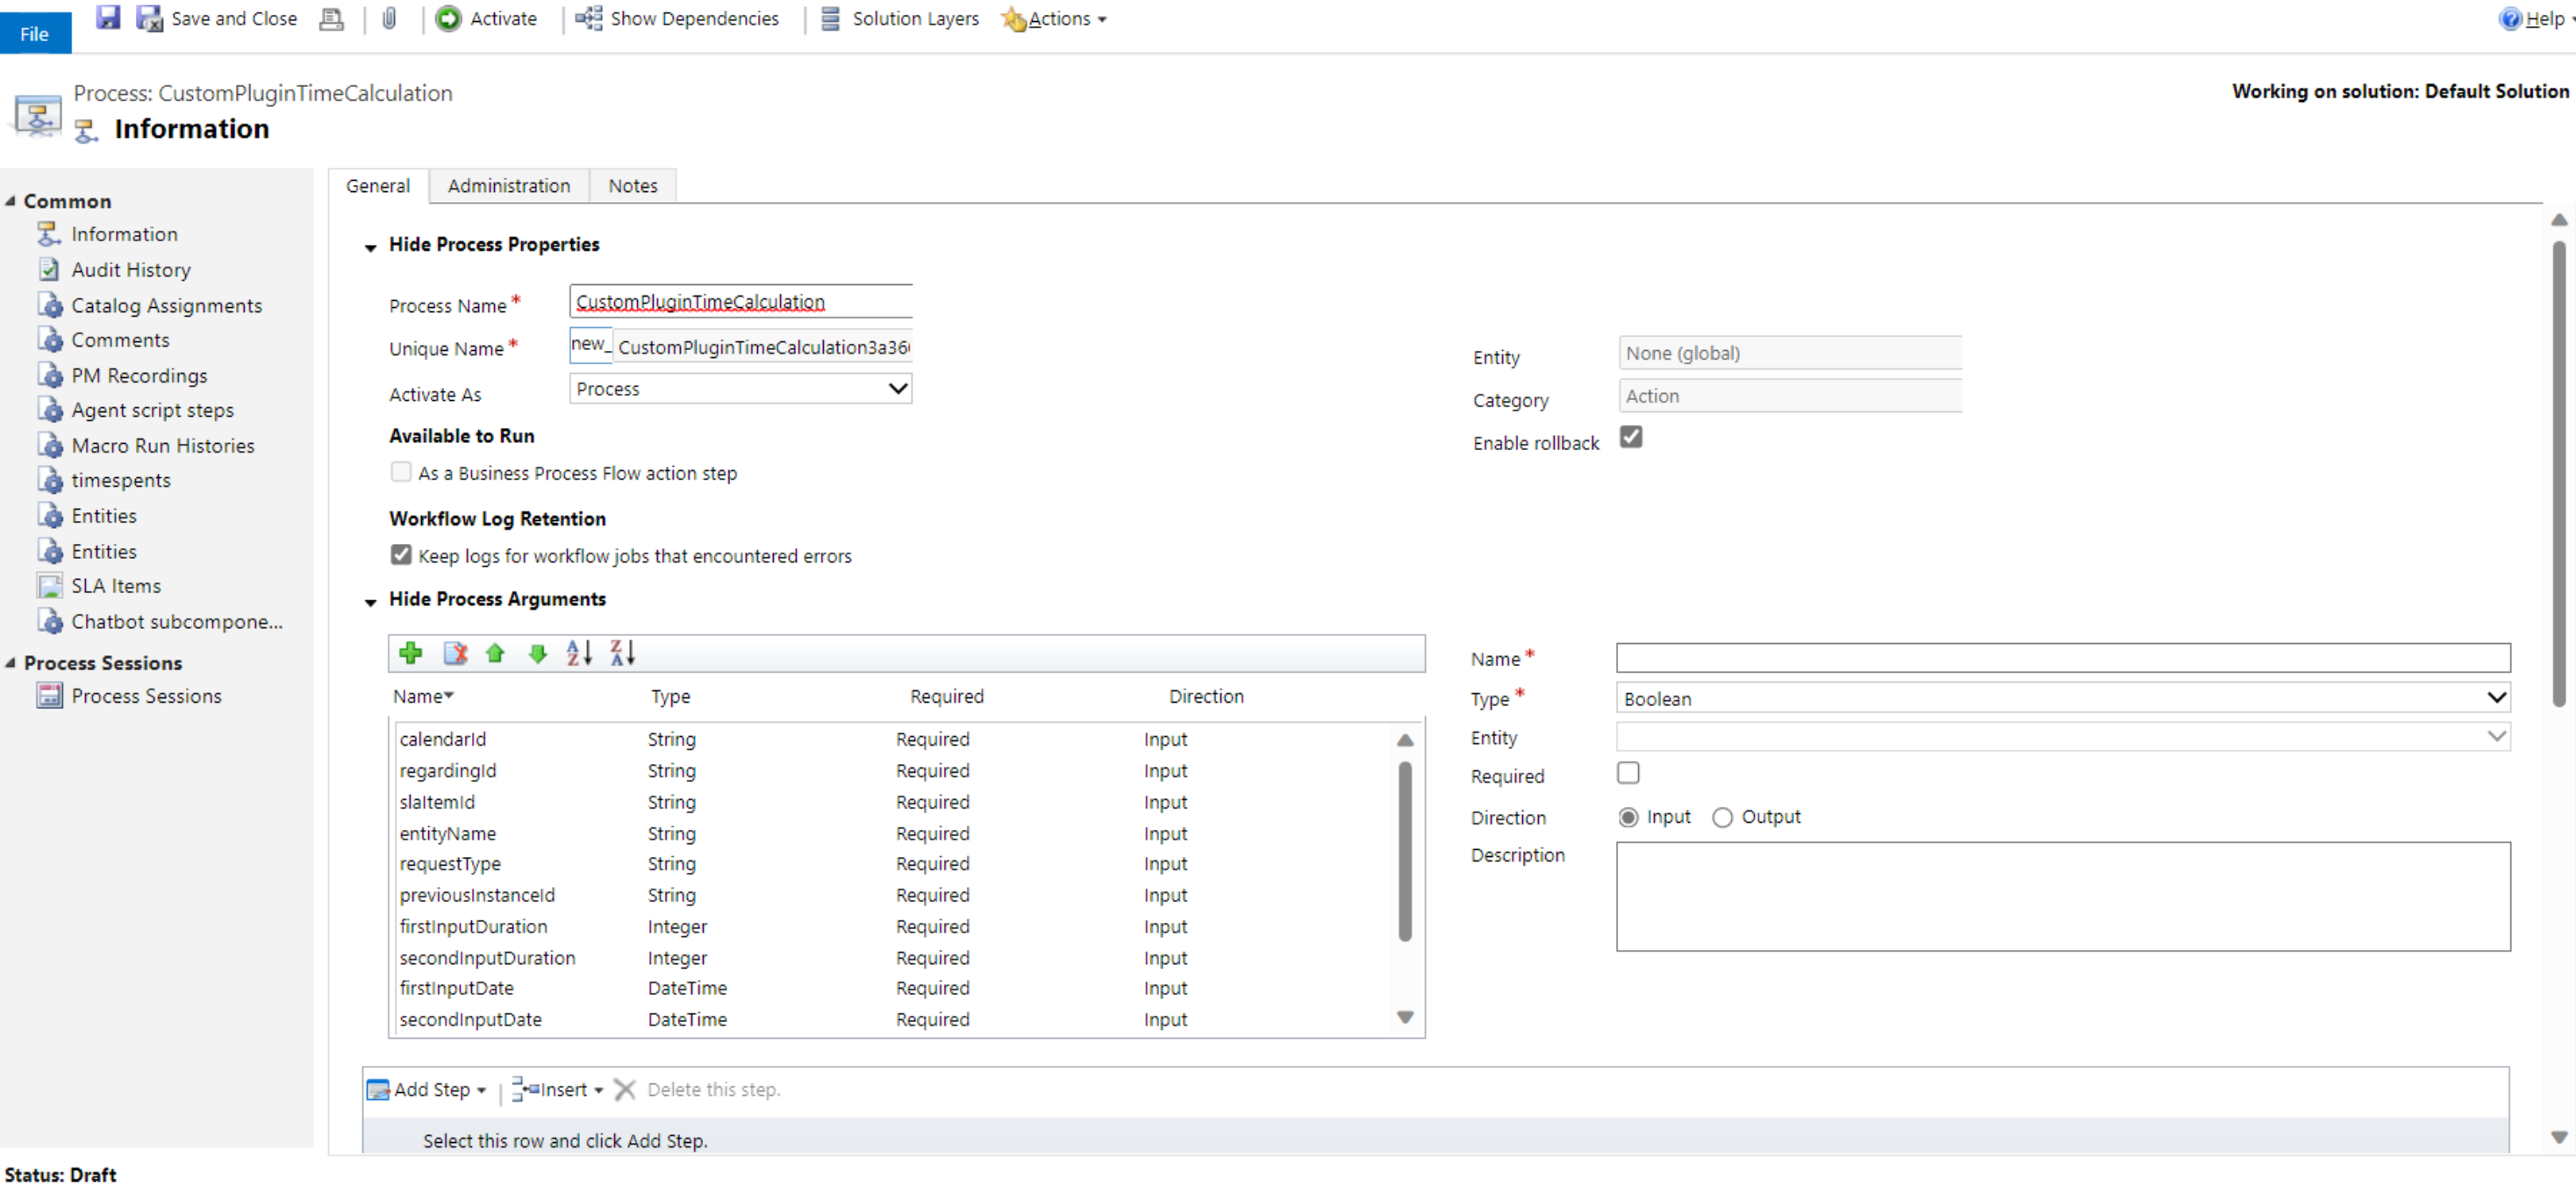 2 New Features with SLAs in Dynamics 365 for Customer Service